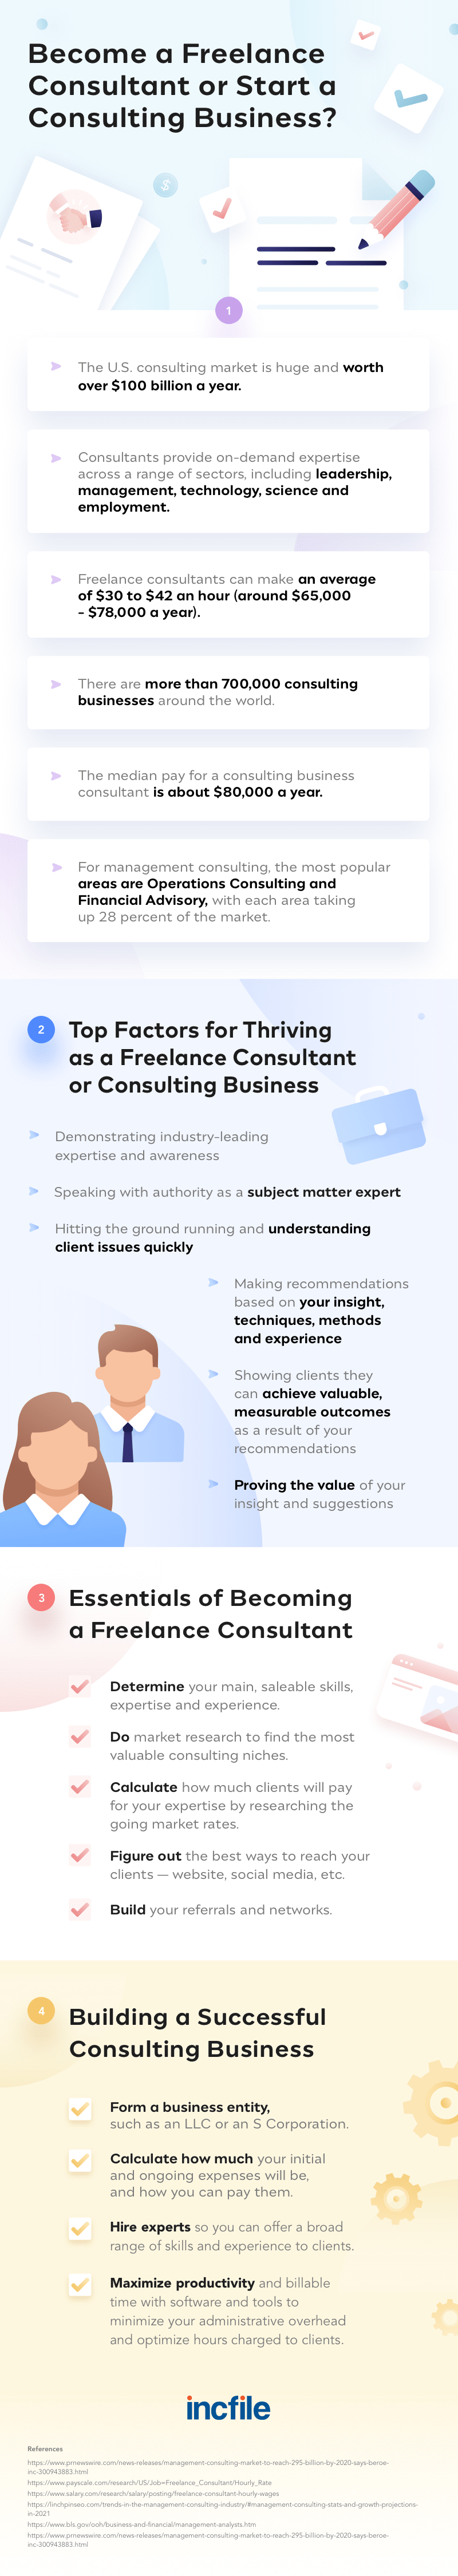 freelance consulting vs starting a consulting business